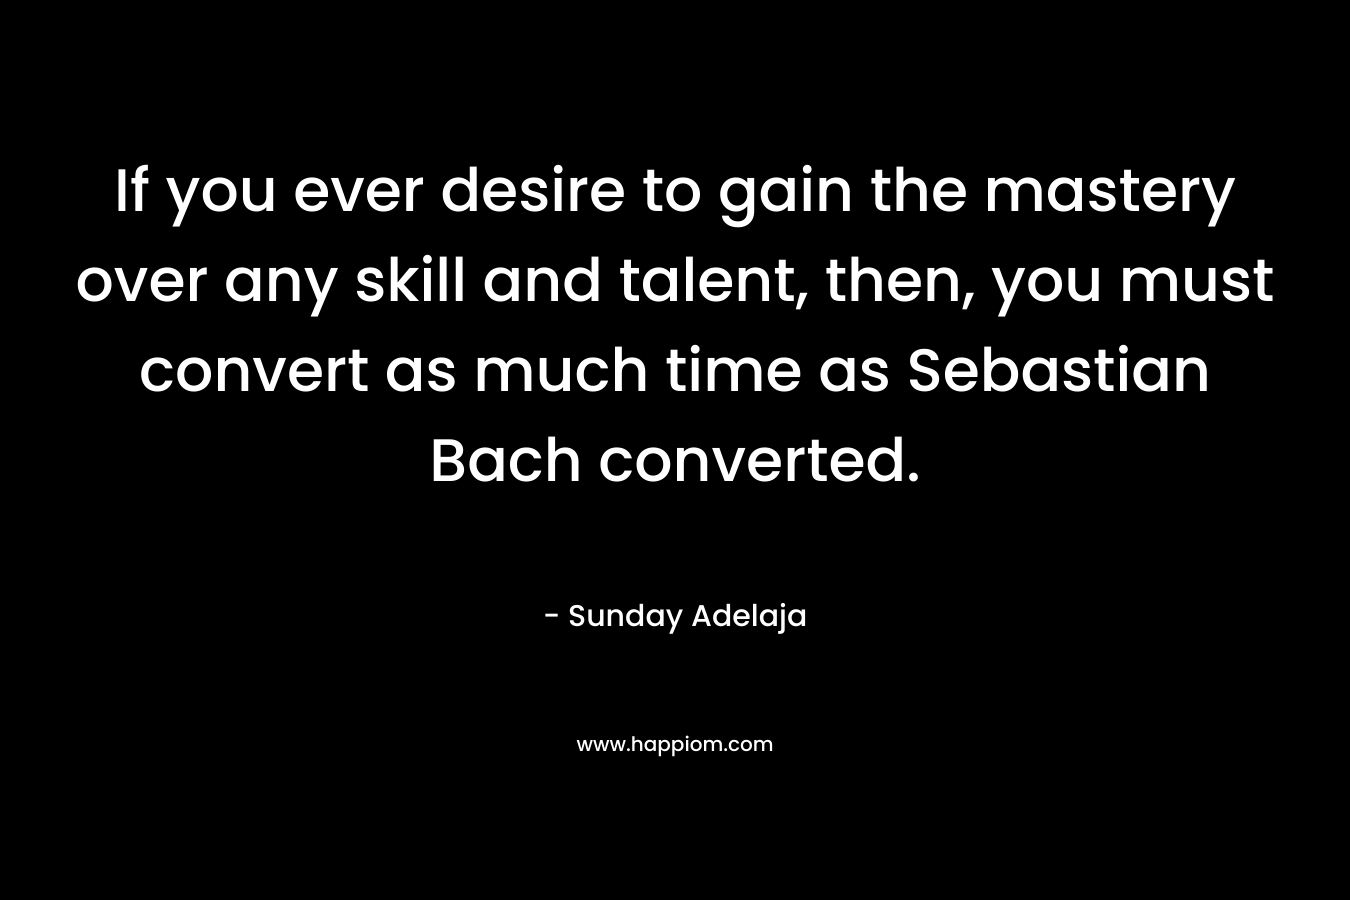 If you ever desire to gain the mastery over any skill and talent, then, you must convert as much time as Sebastian Bach converted. – Sunday Adelaja